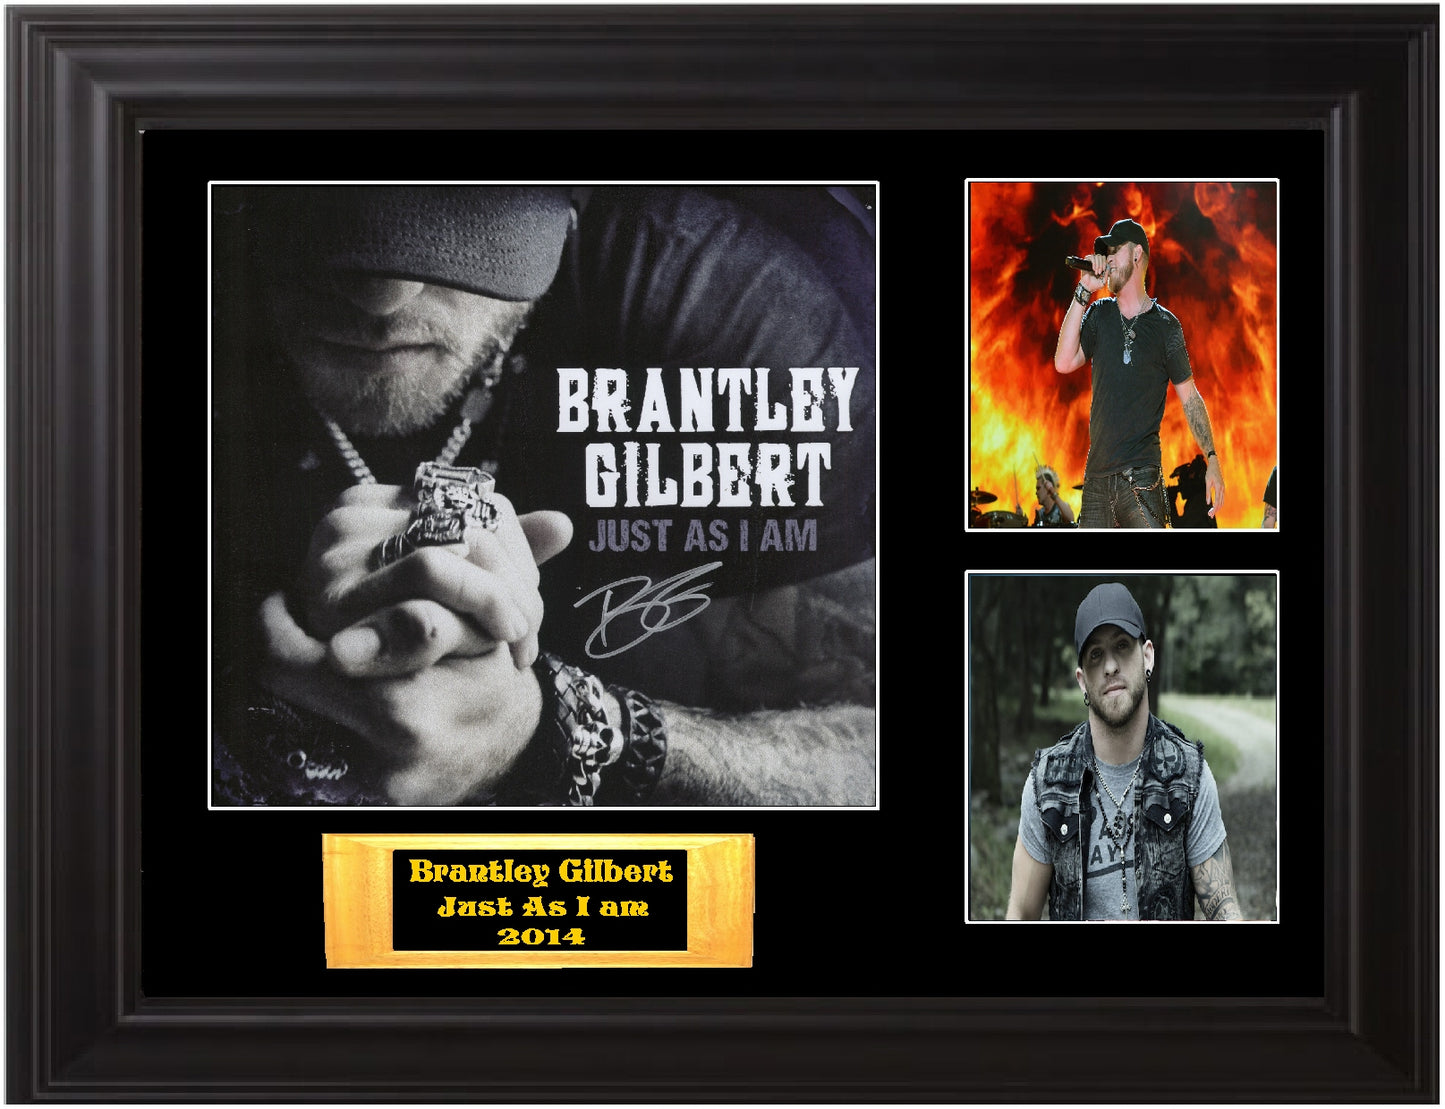 Brantley Gilbert Autographed LP Flat - Zion Graphic Collectibles